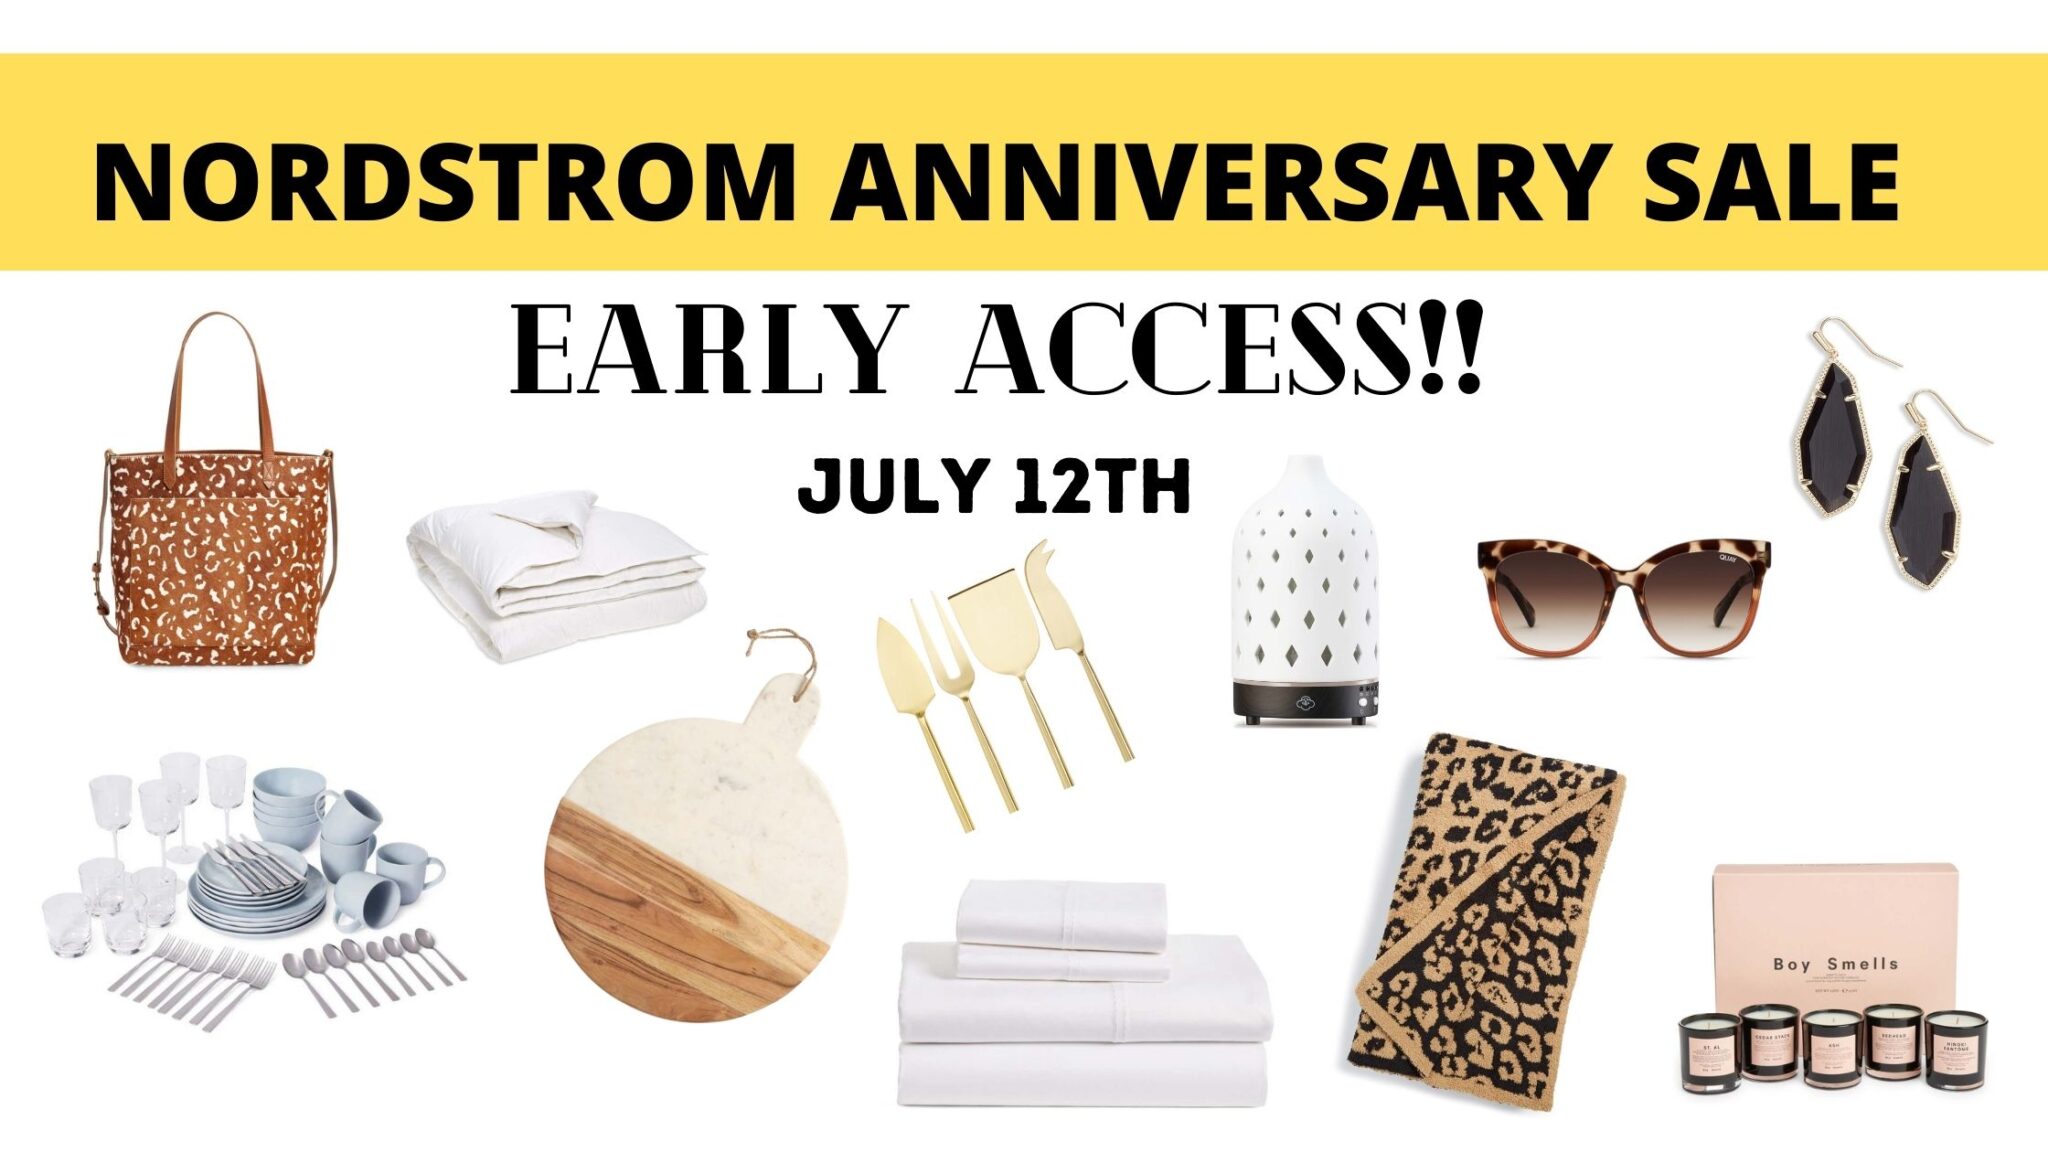 Nordstrom Anniversary Sale 2021: Best of Home Decor - StampinFool.com